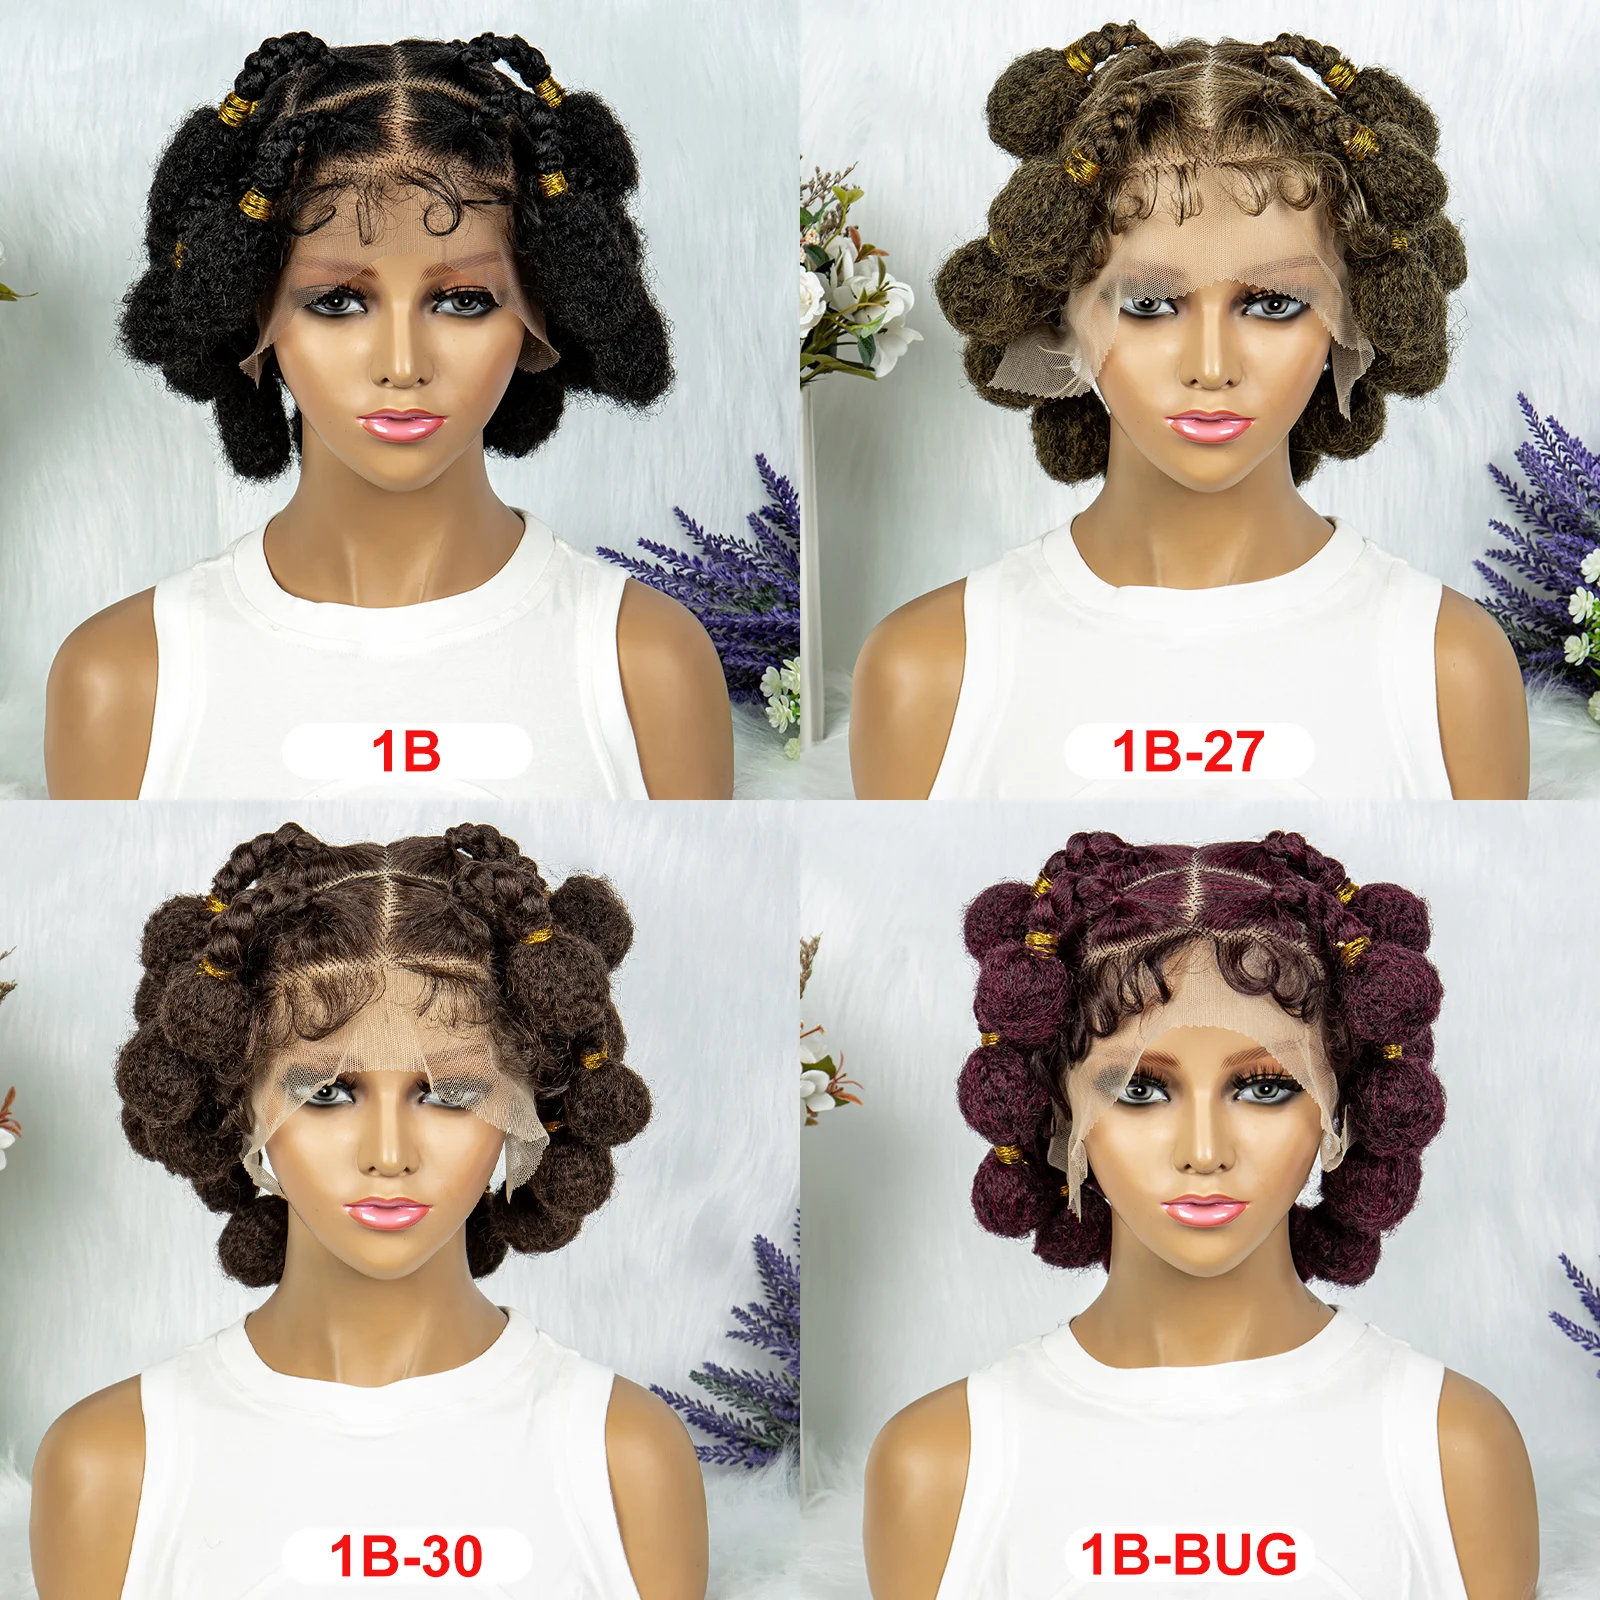 New Style Bantu Knot Braided Wigs Synthetic HD Full Lace Wig For Black Women Afrian Braid Braiding Hair Knotless Box Braids Wigs images - 6